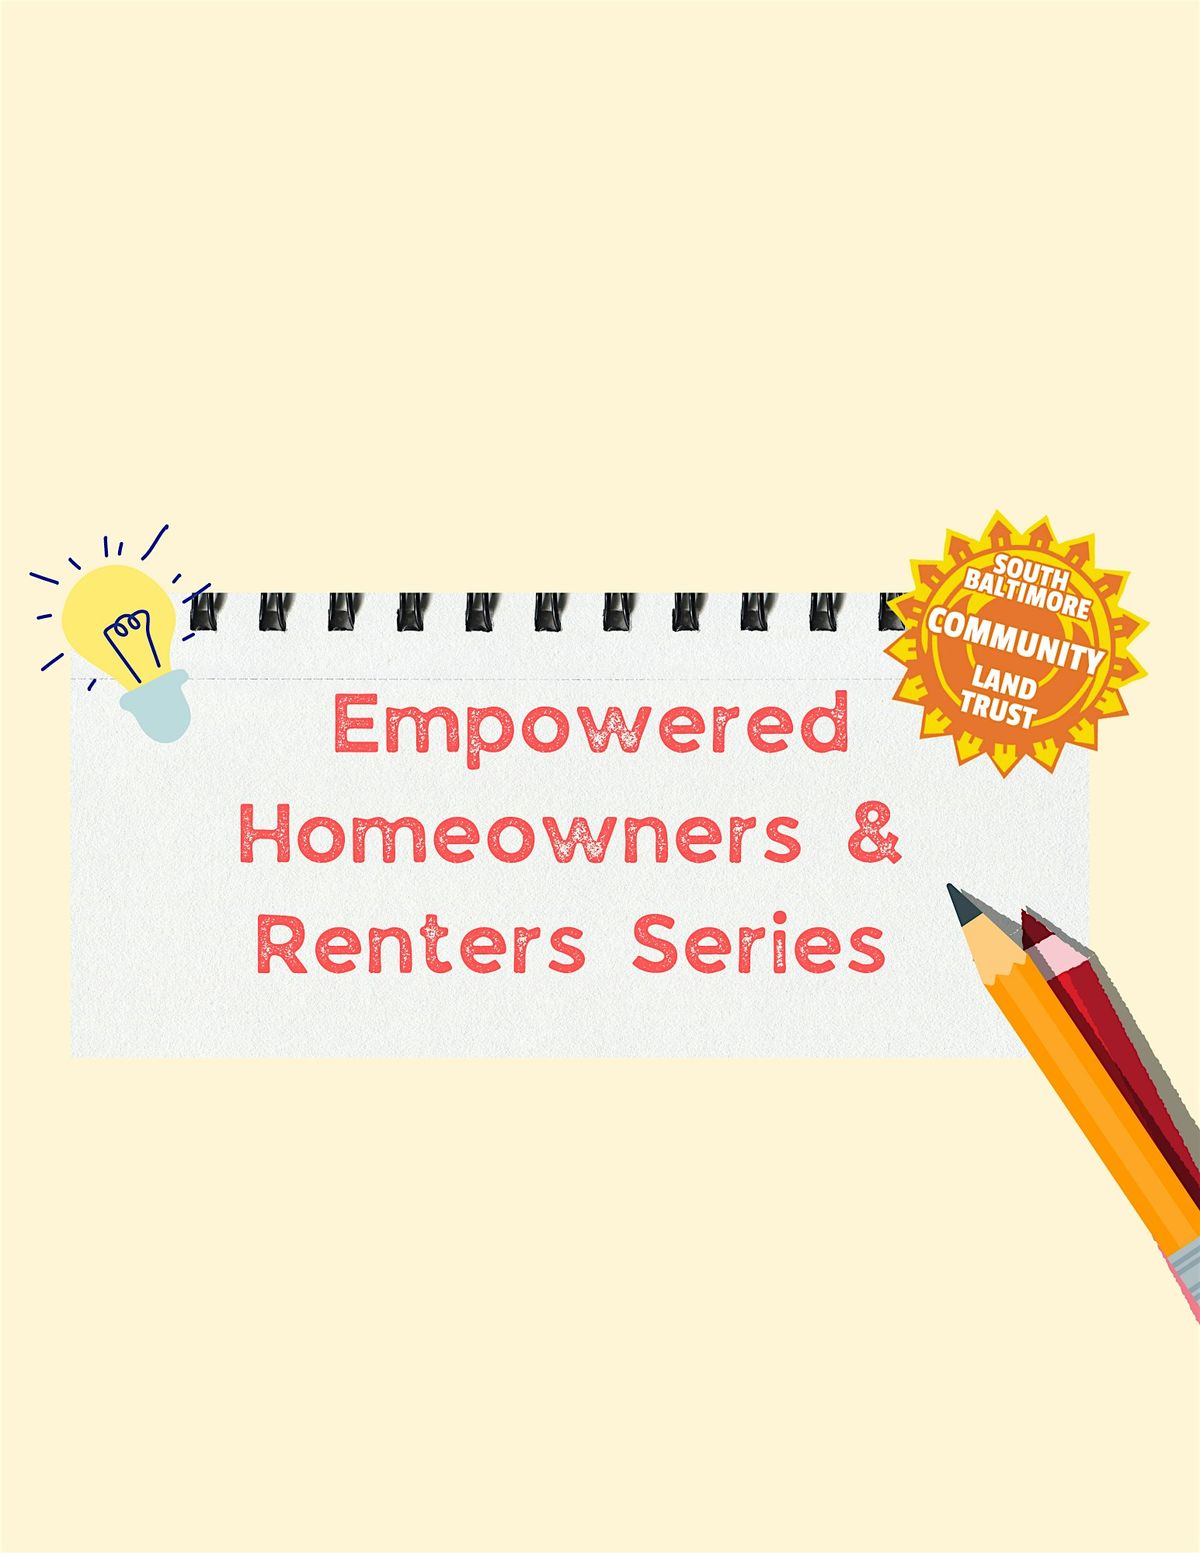 Empowered Homeowners & Renters Series - May